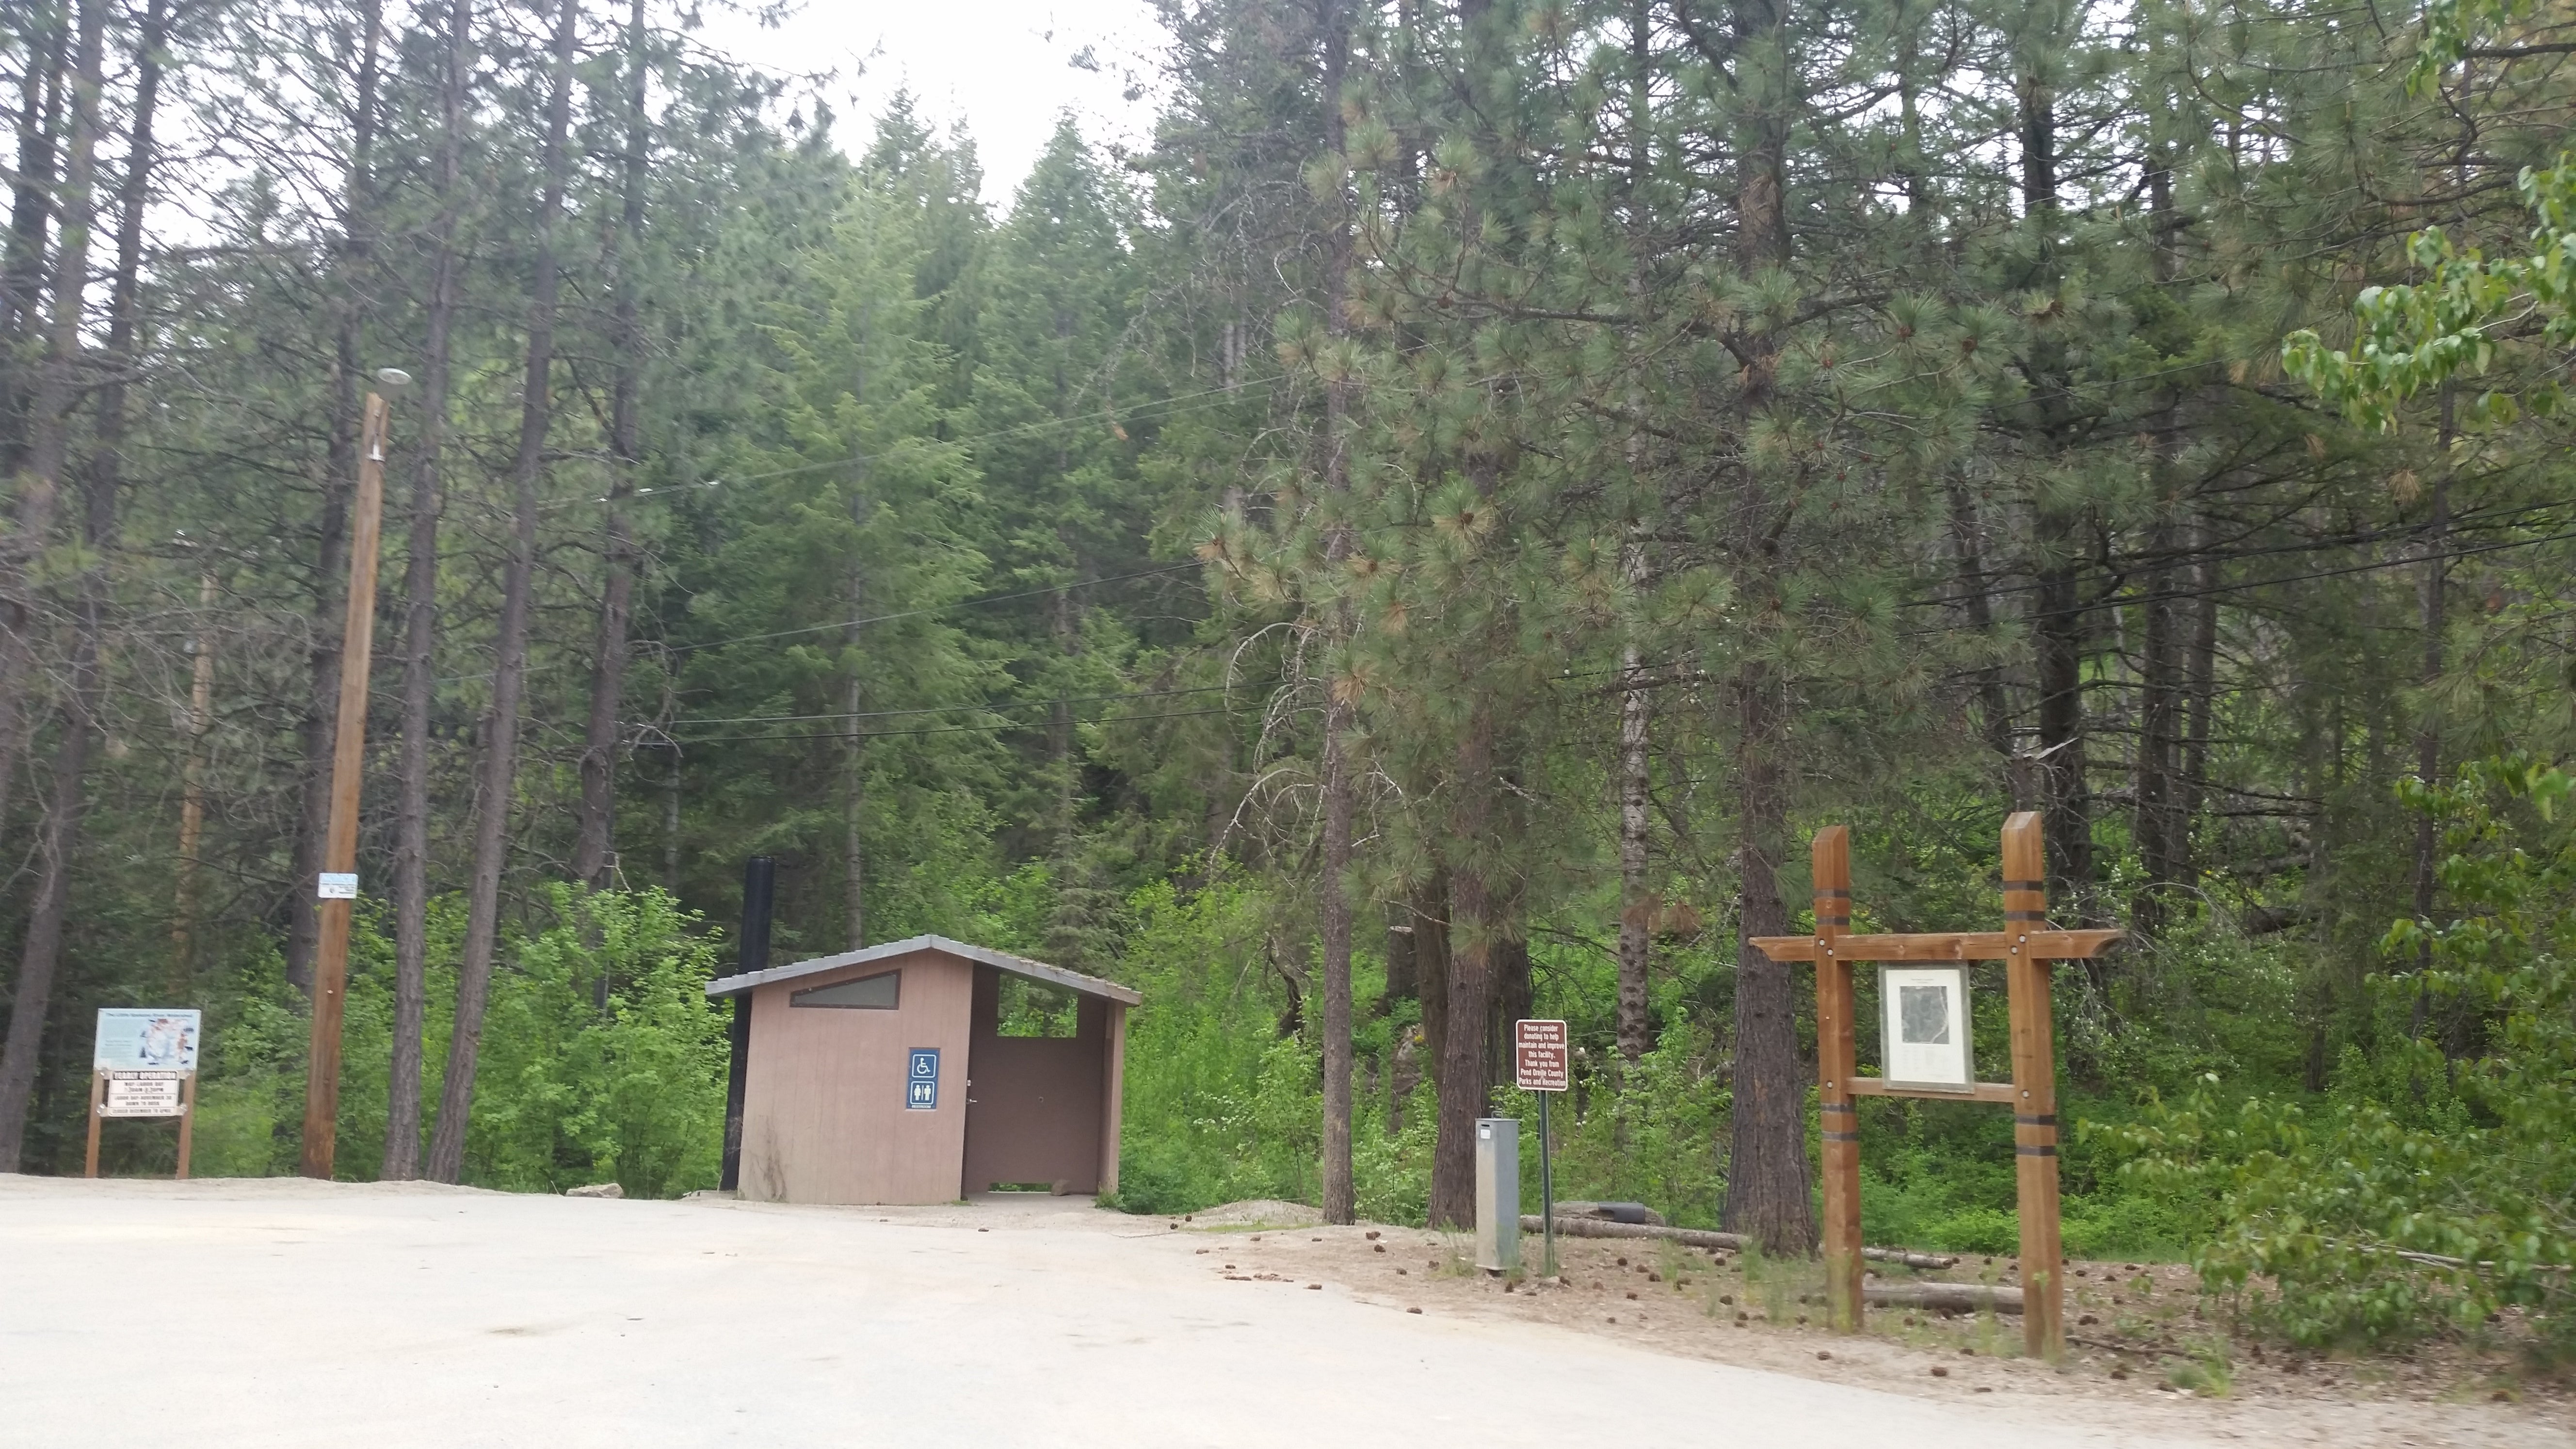 Camper submitted image from Pend Oreille County Park - 5